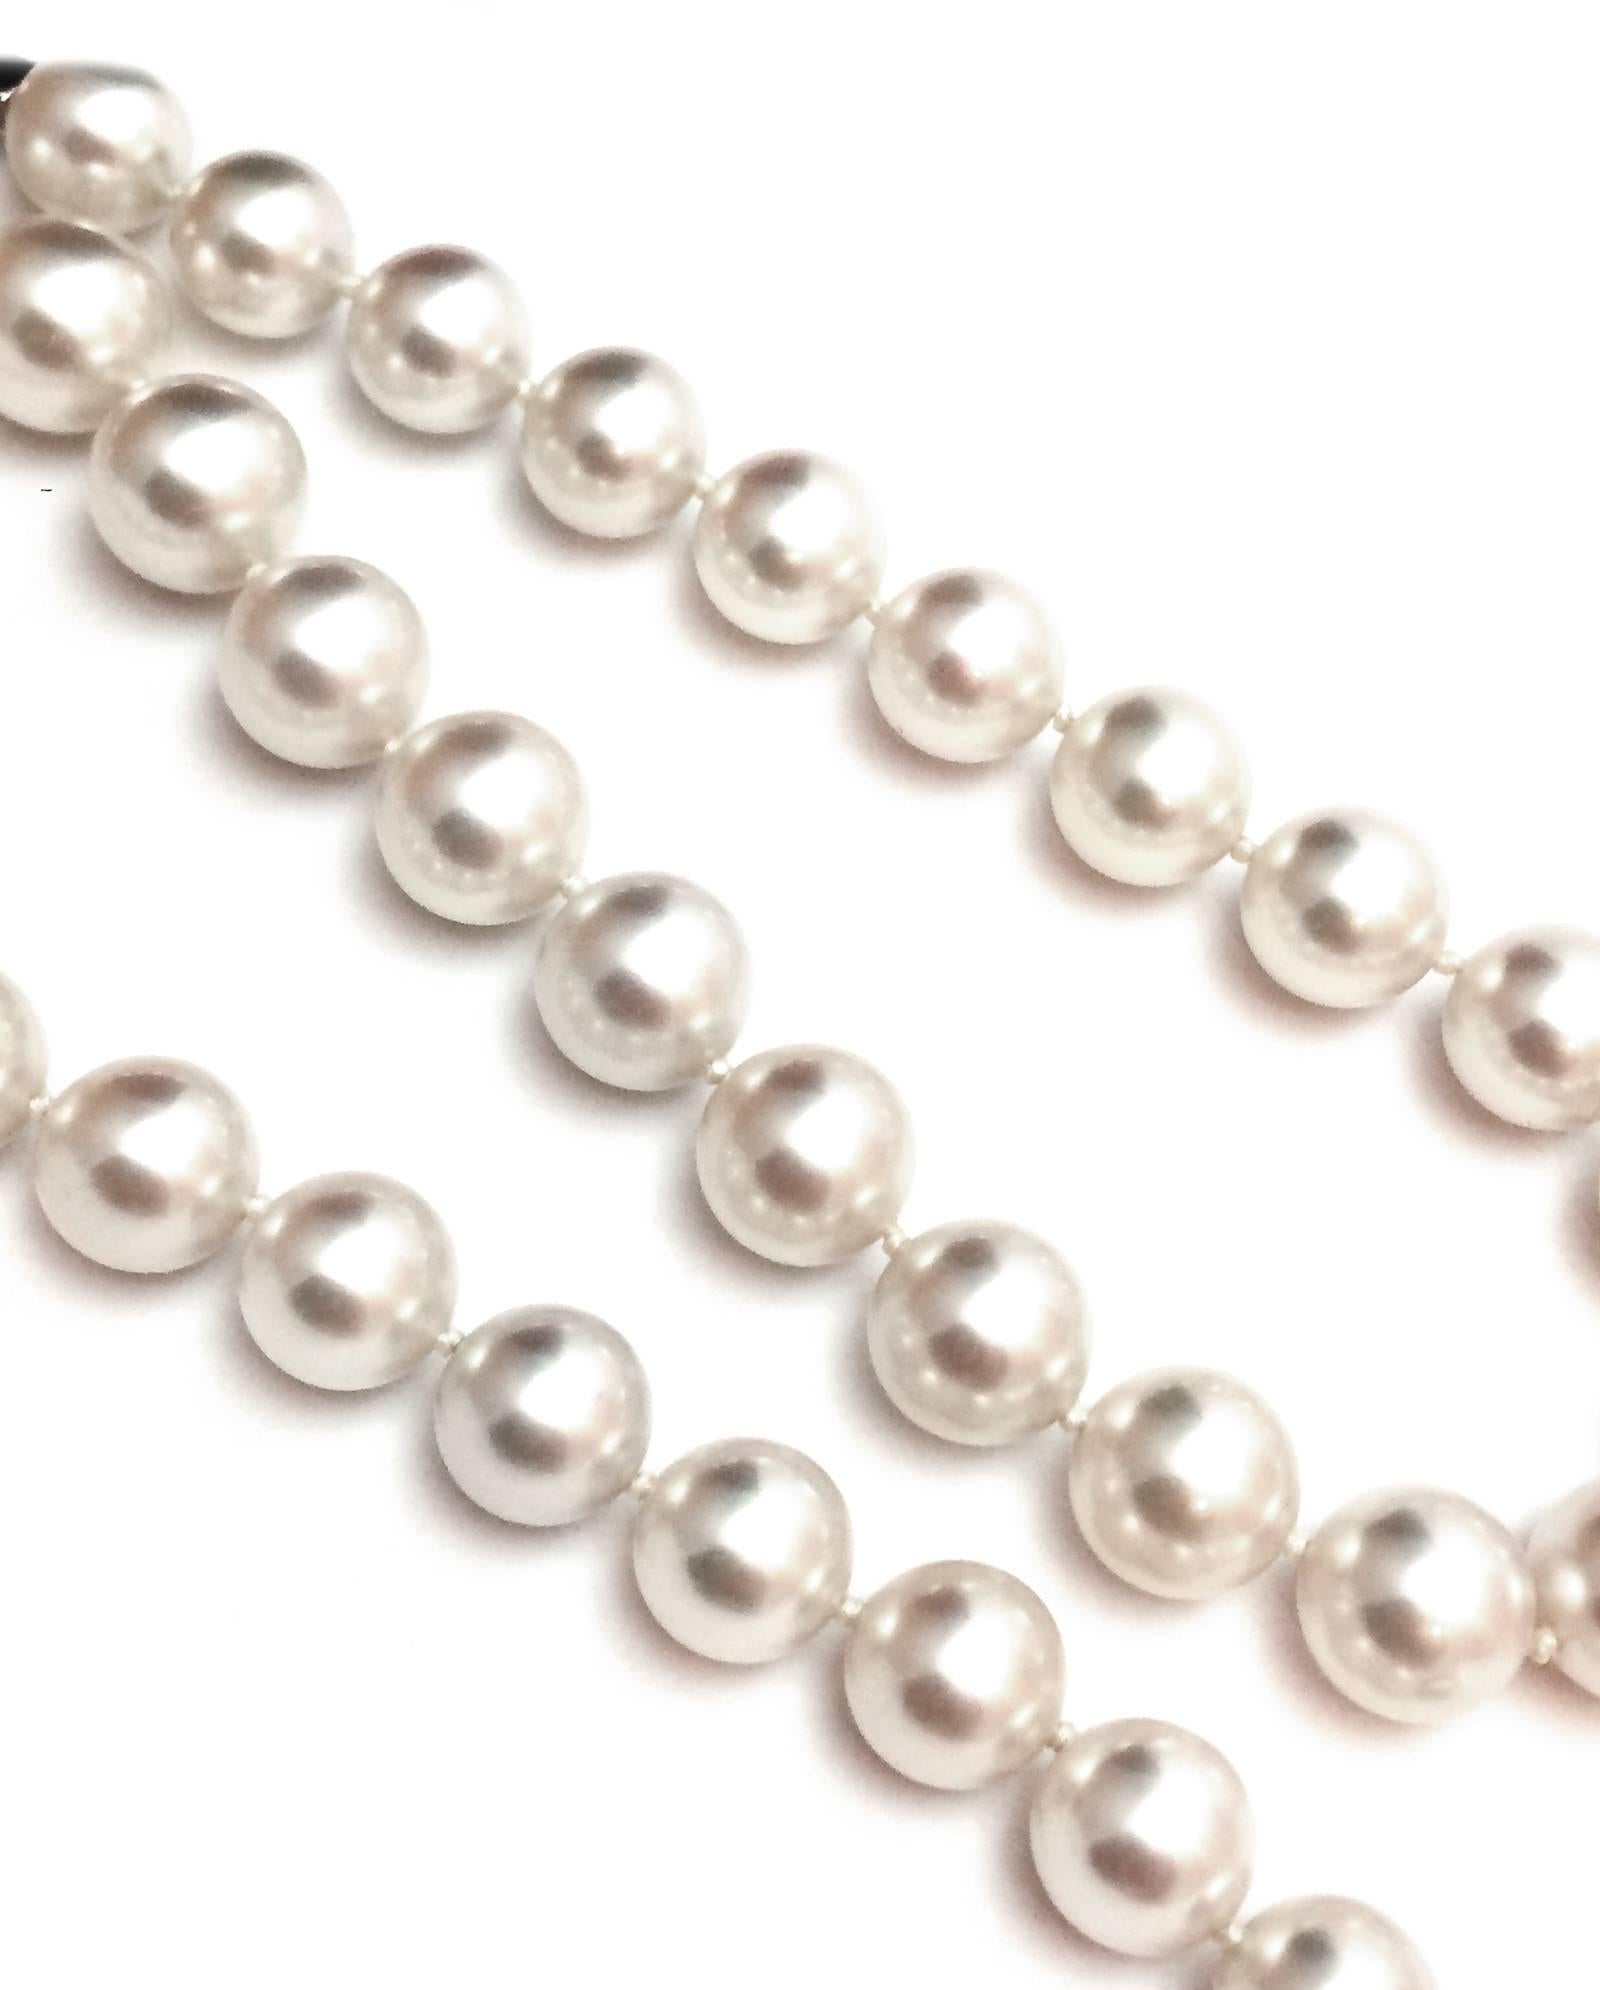 Exclusive South Sea pearls necklace made of 37 perfectly round shaped pearls.
Top luster, perfect skin sold by Cartier on an Agrafe white gold and diamond clasp.
Pearl diameter : 11,5-10 mm
Length : 460 mm = 18.11 inches
Was sold : 74,000 €